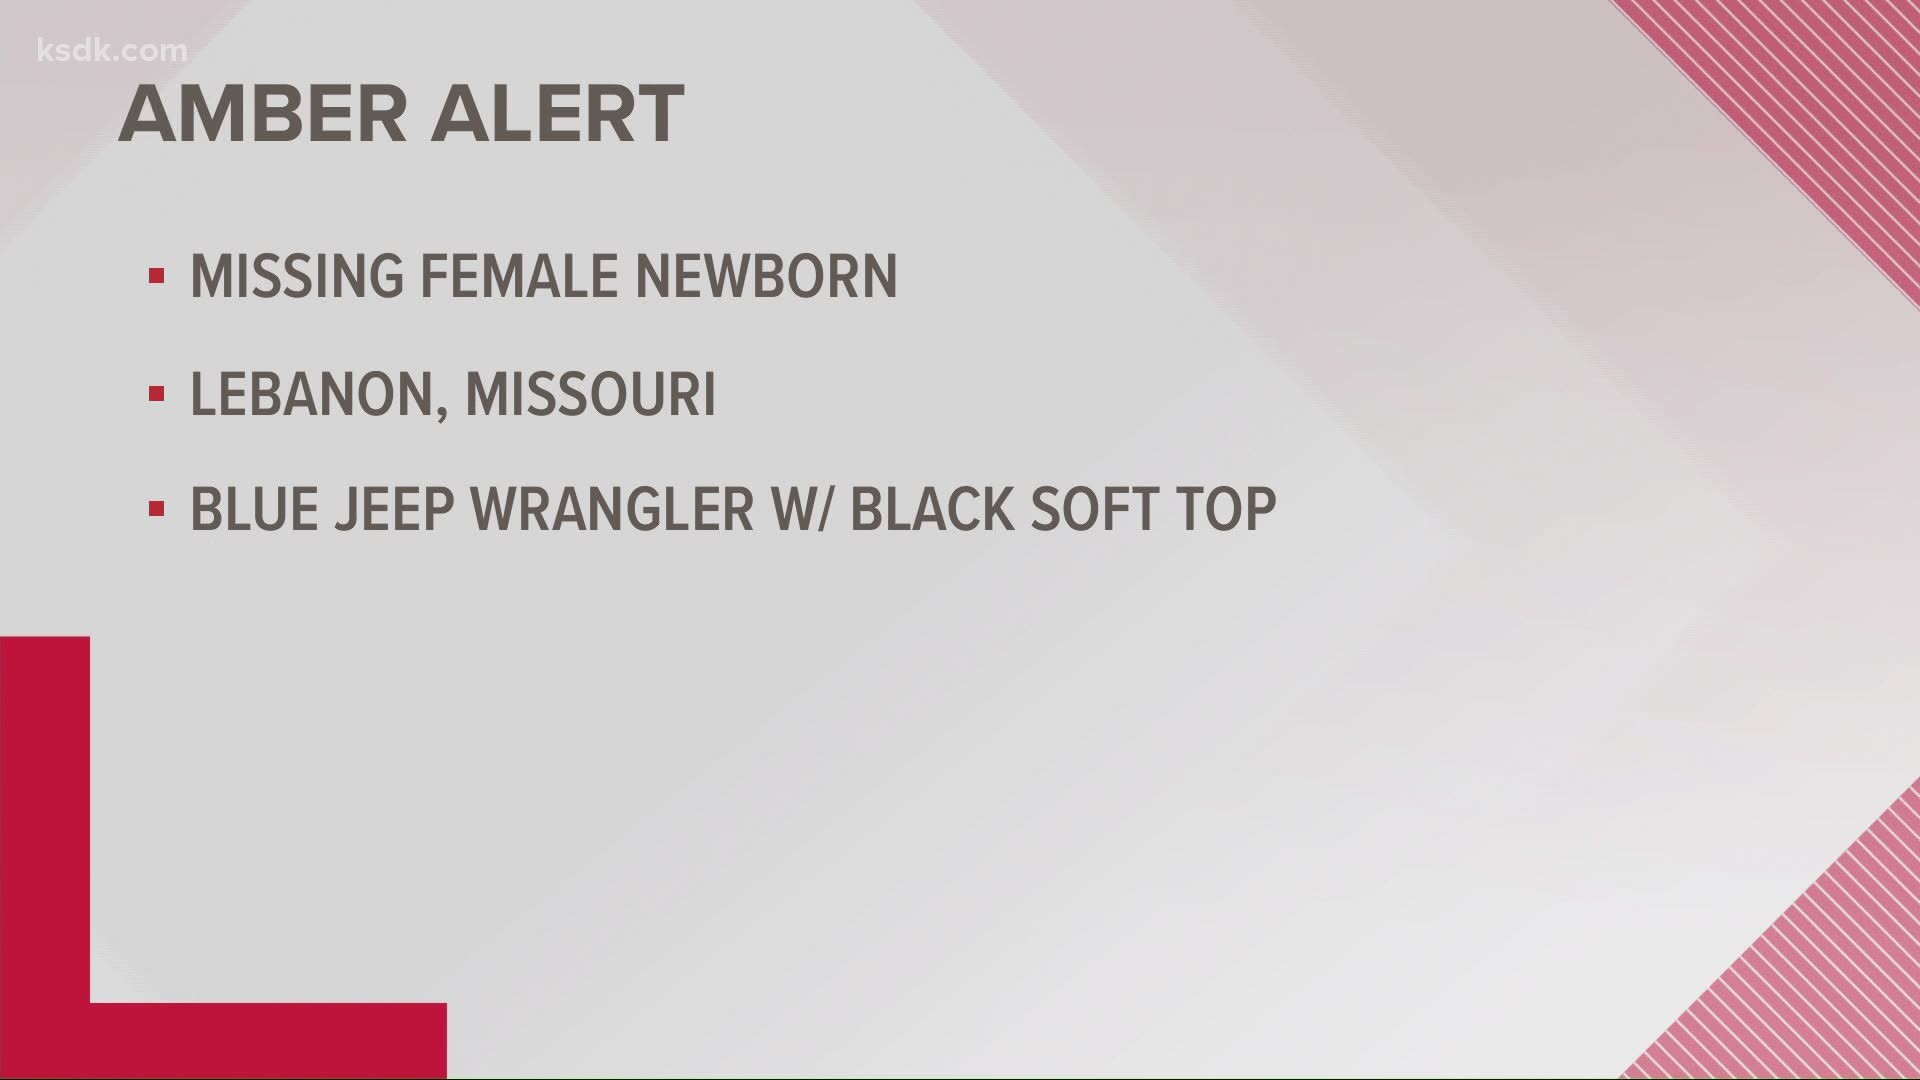 An Amber Alert was issued for a missing newborn on Tuesday afternoon